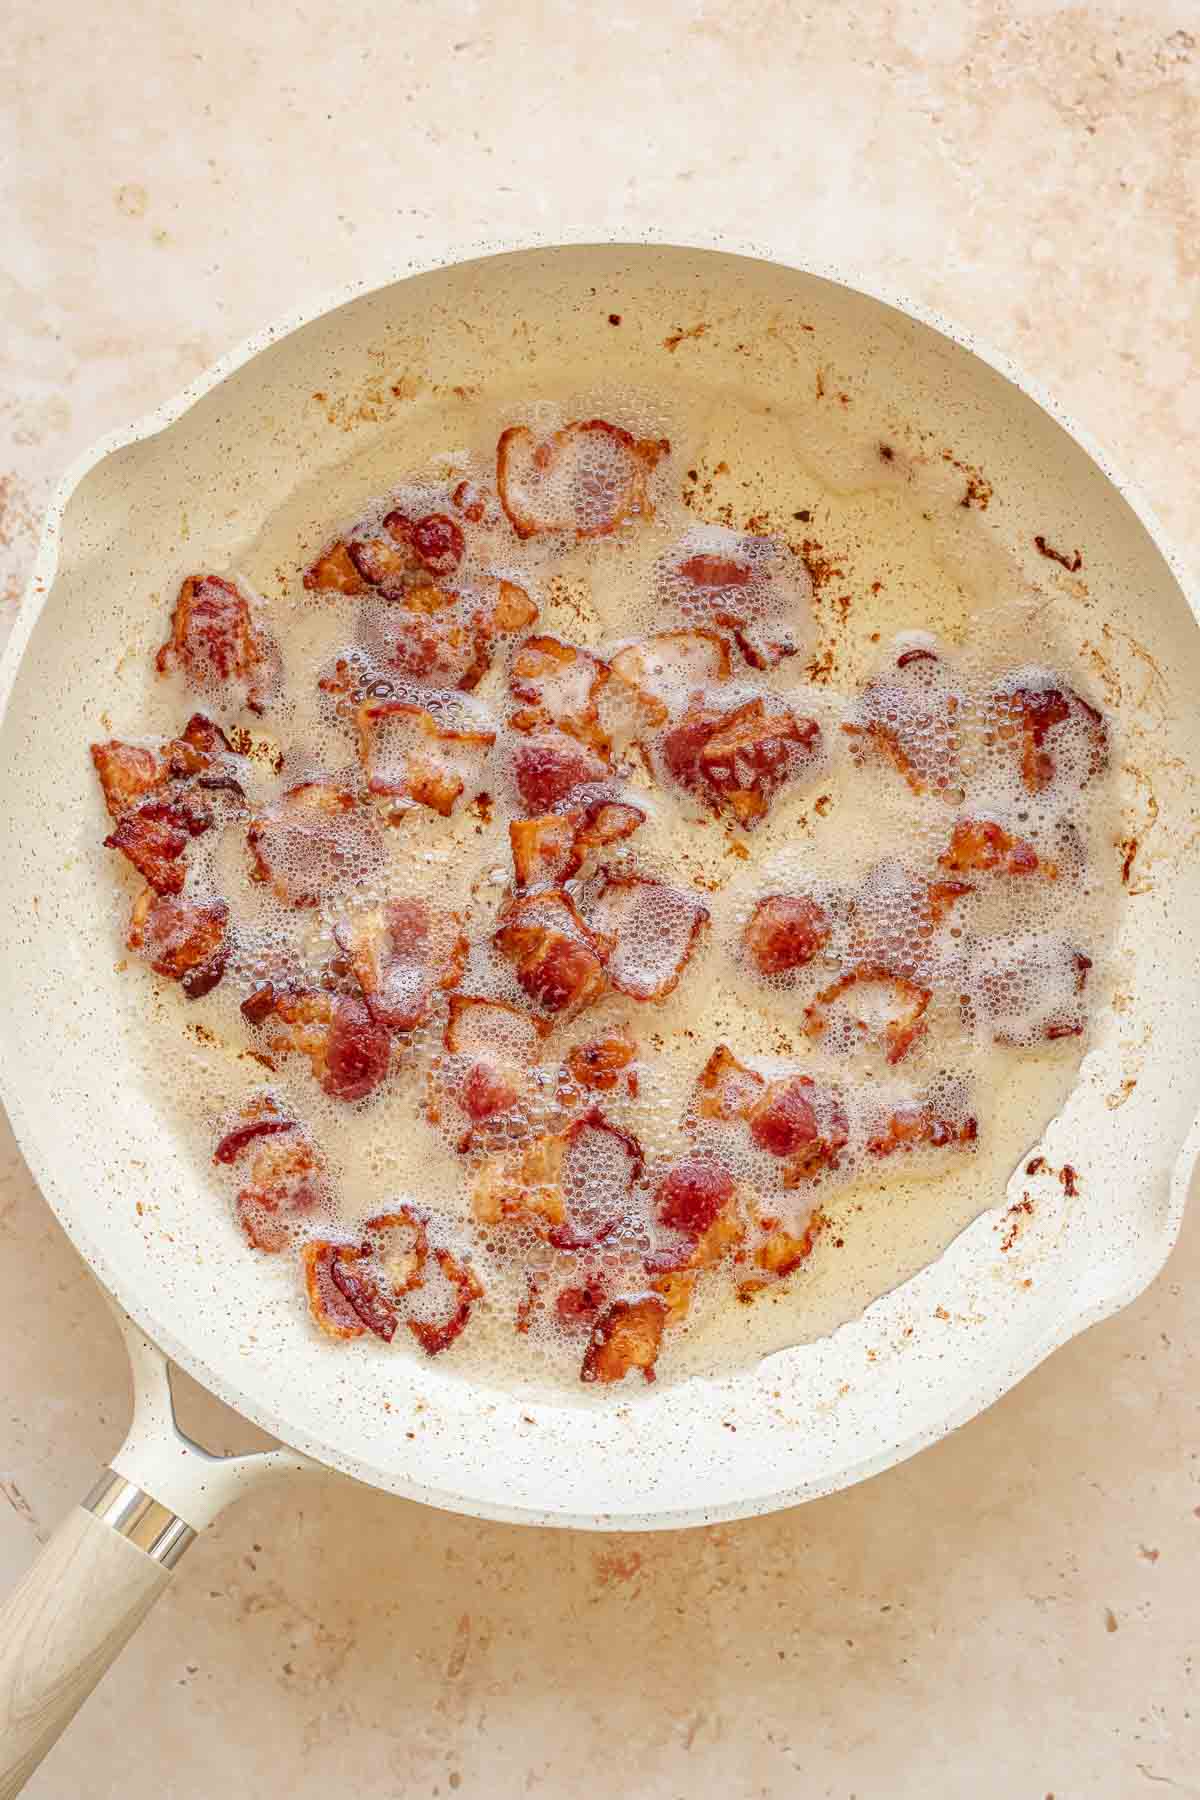 Bacon pieces cooking in a pan with grease.